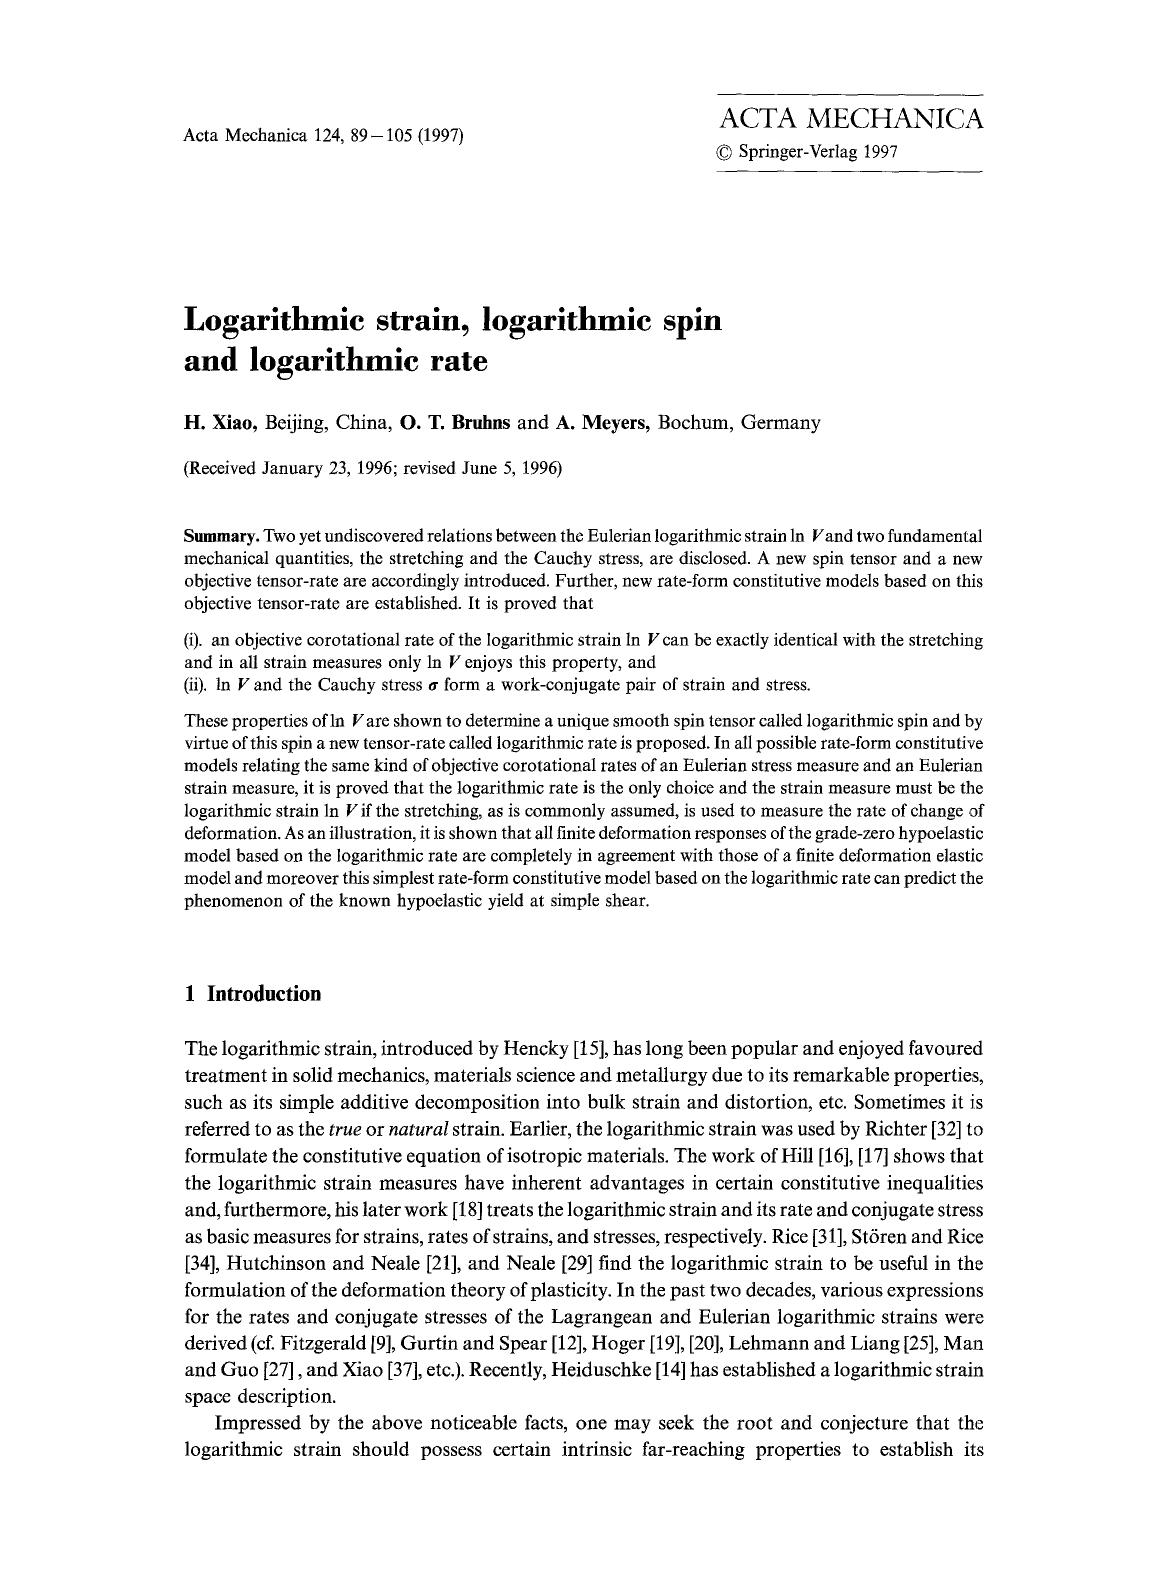 Logarithmic strain, logarithmic spin and logarithmic rate by Unknown